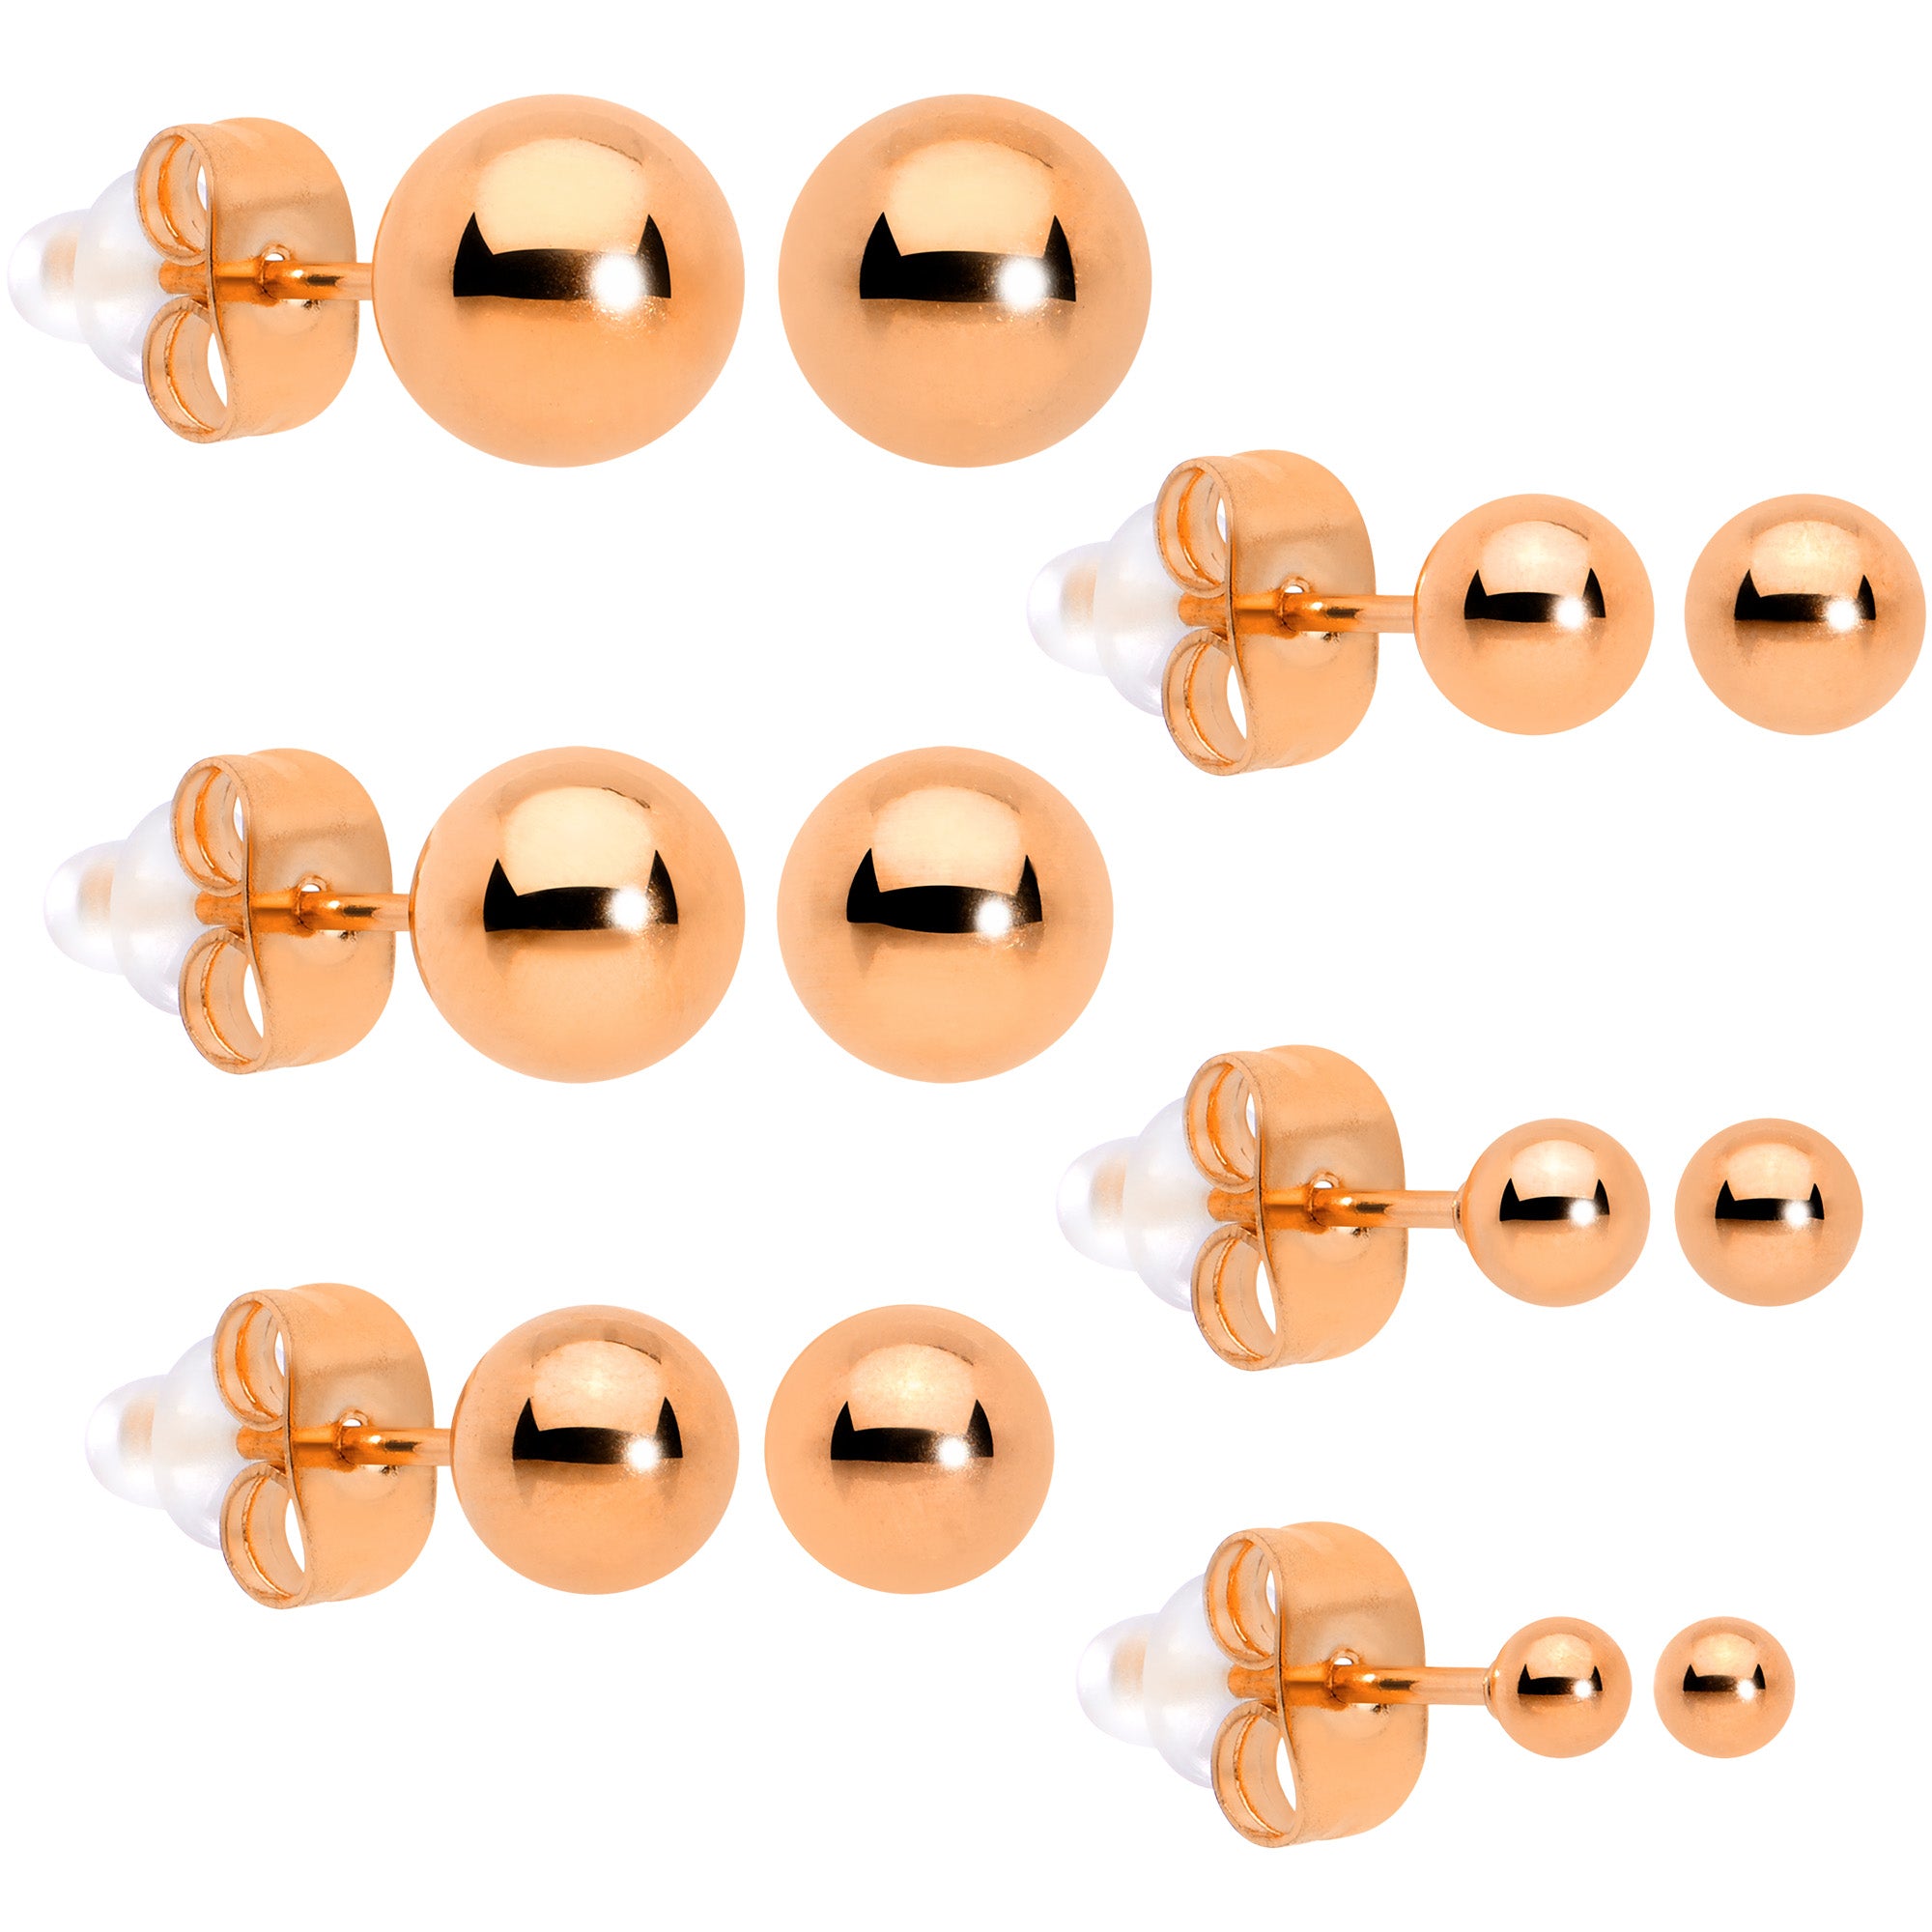 3mm-8mm Ball Stud Rose Gold Tone 316L Stainless Steel Earrings 6 Pack